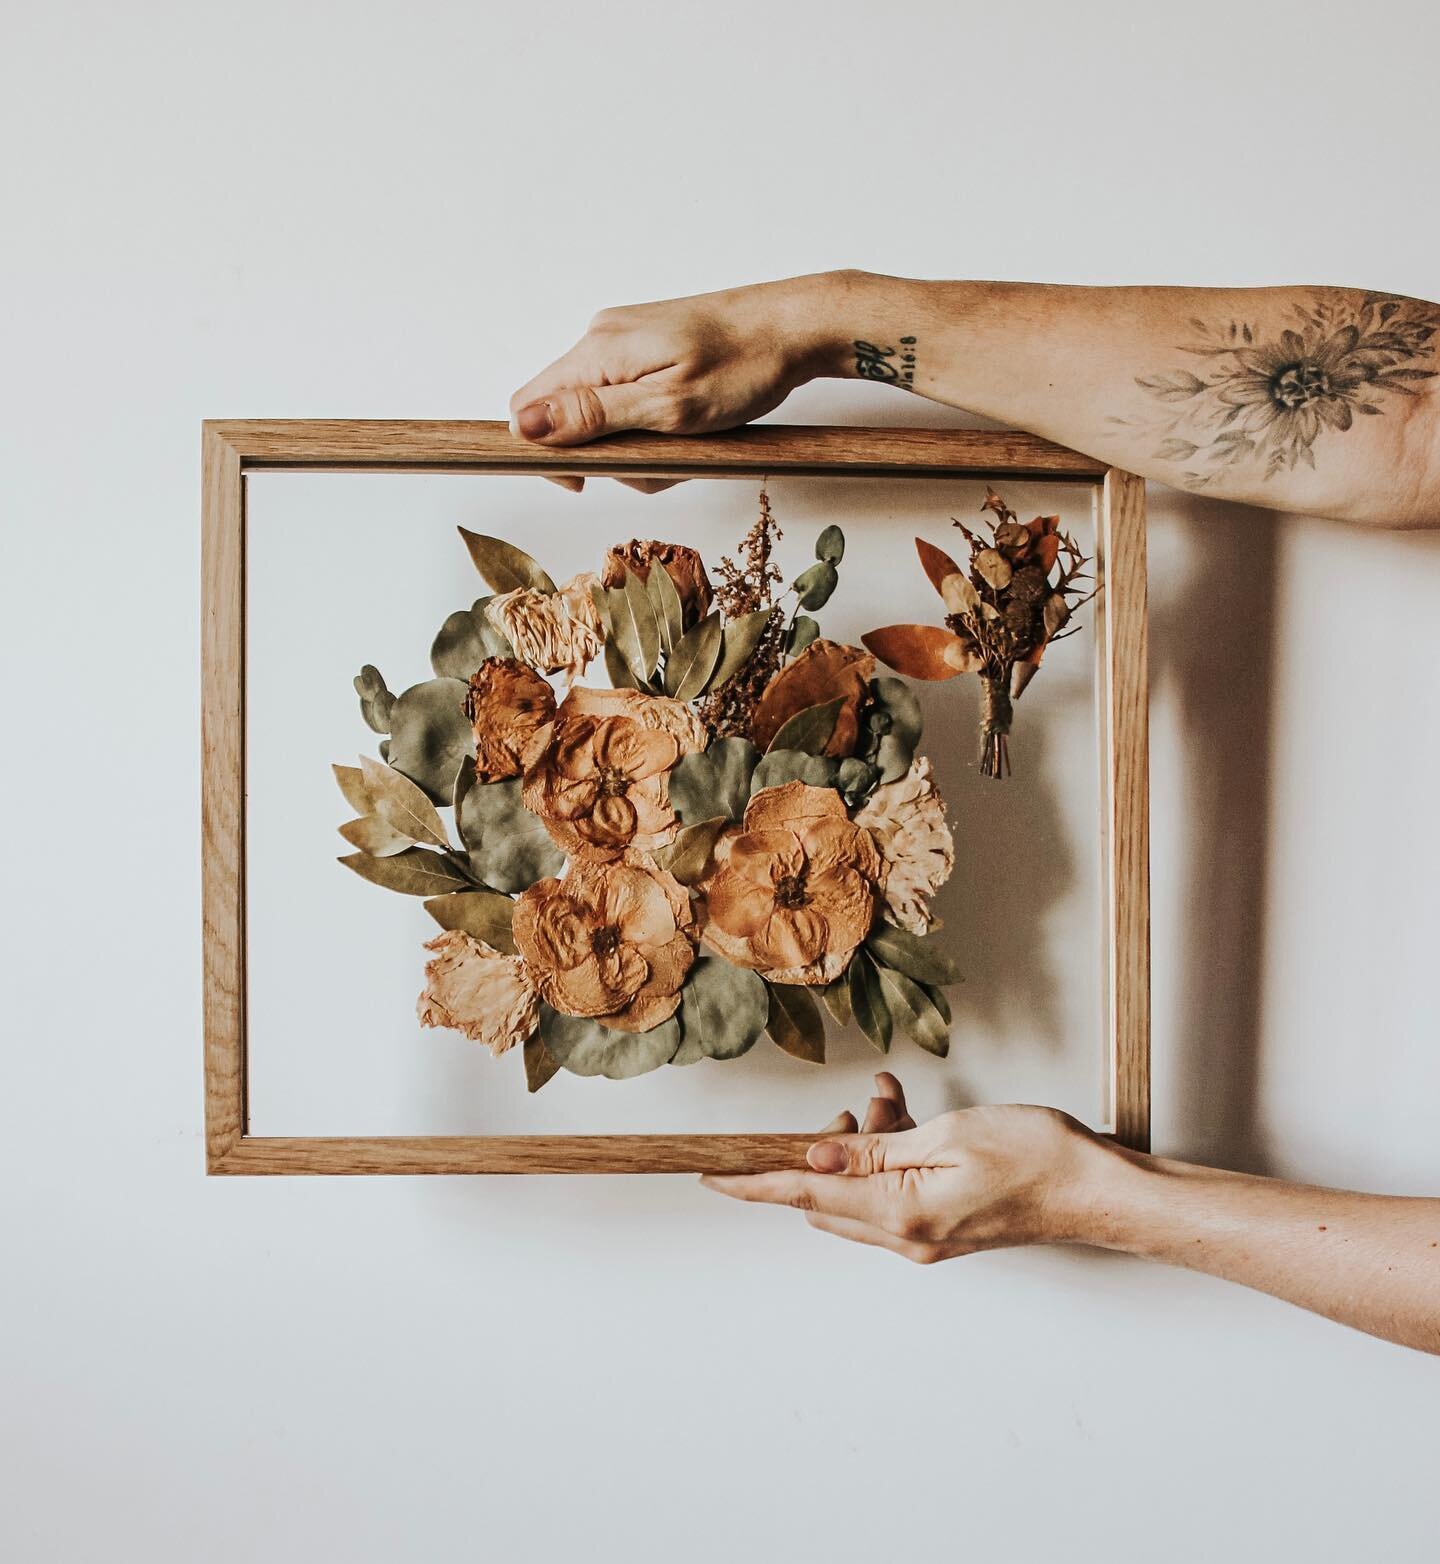 Back home in Hawaii 🤍 
5 1/2 years dried bridal bouquet &amp; boutonniere pressed in the Solid light oak 11&rdquo;x14&rdquo; frame. 
.
.

#pressedflowers #flowerpressing #flowers #Floridaflowers #pressed #pressingflowers #encouragement #truth #shipb